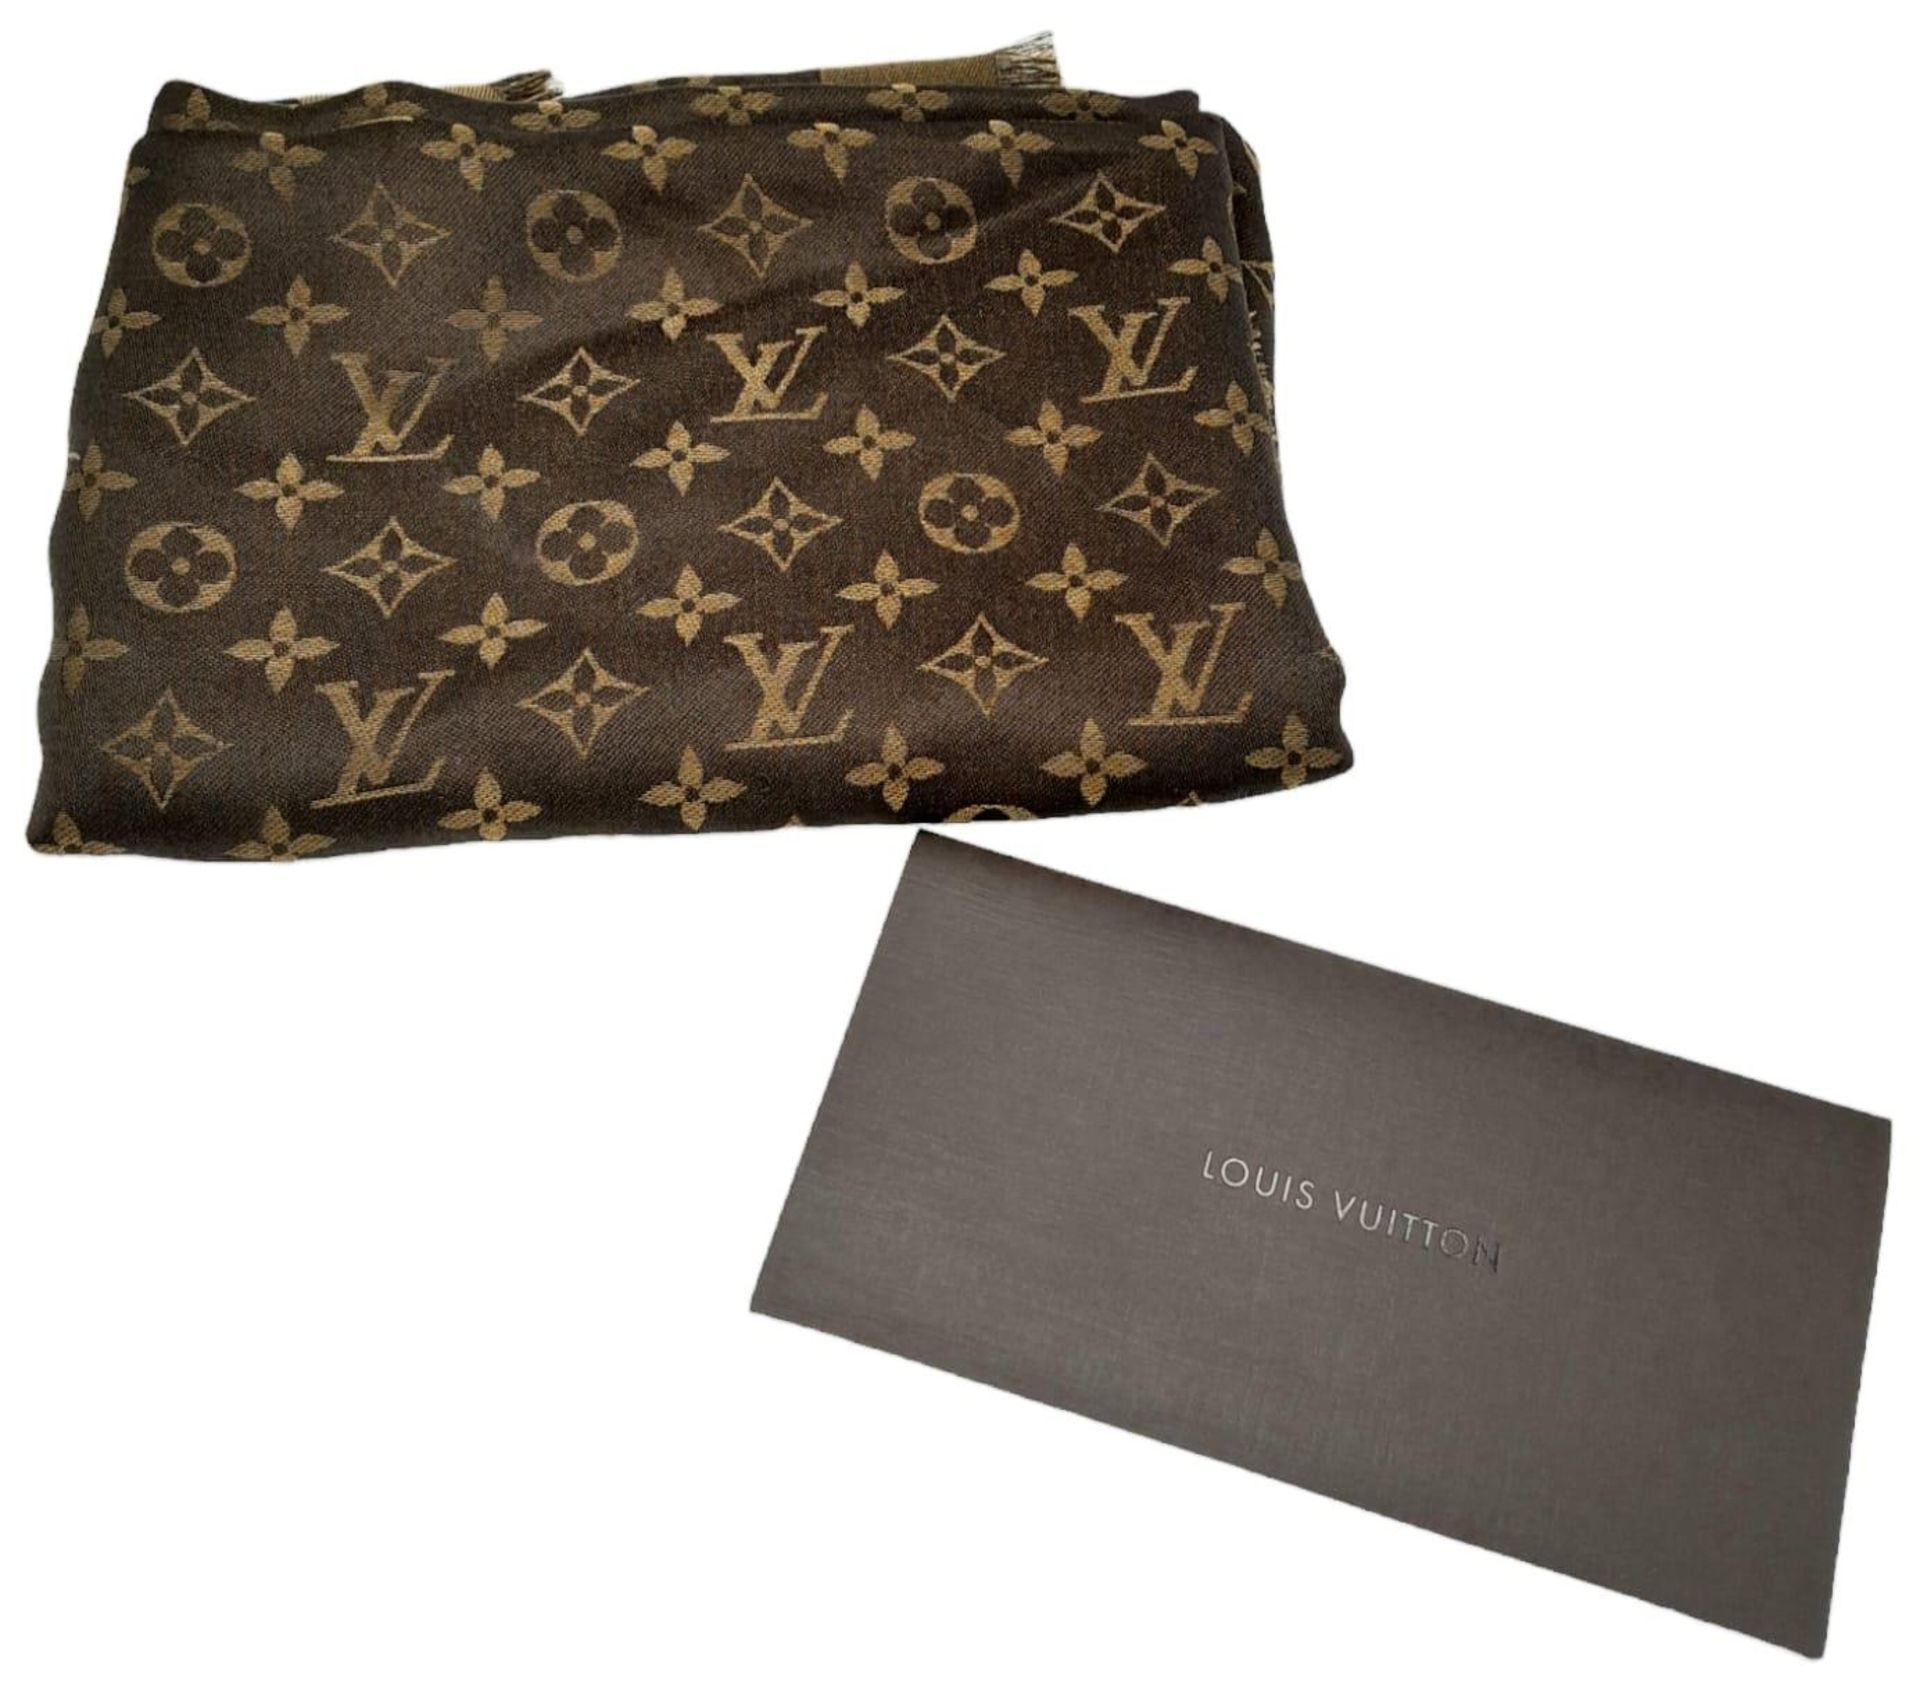 A Louis Vuitton Châle Monogram Shine Silk Scarf. Comes with purchase receipt. Approximately 140cm - Image 3 of 6